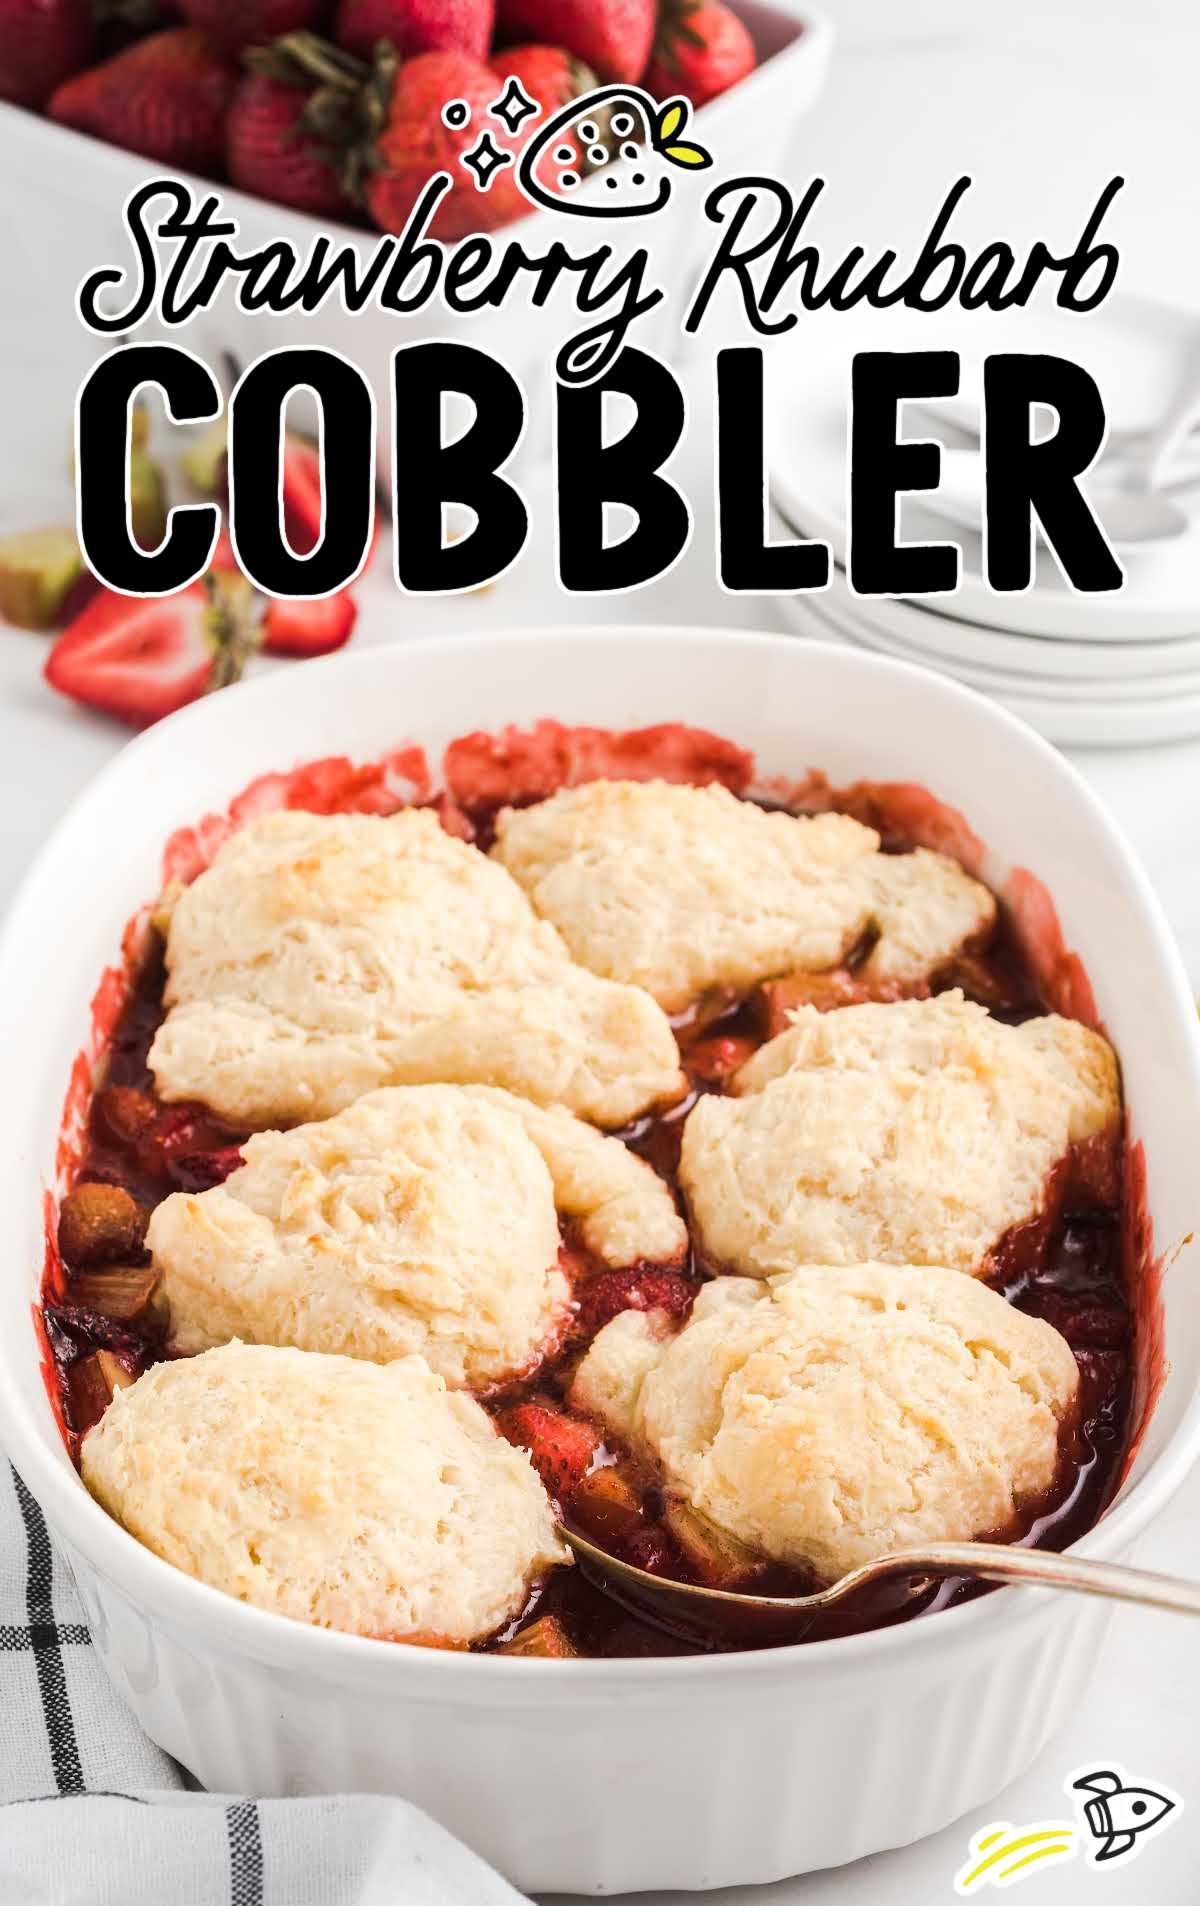 close up shot of a Strawberry Rhubarb Cobbler cobbler in a baking dish